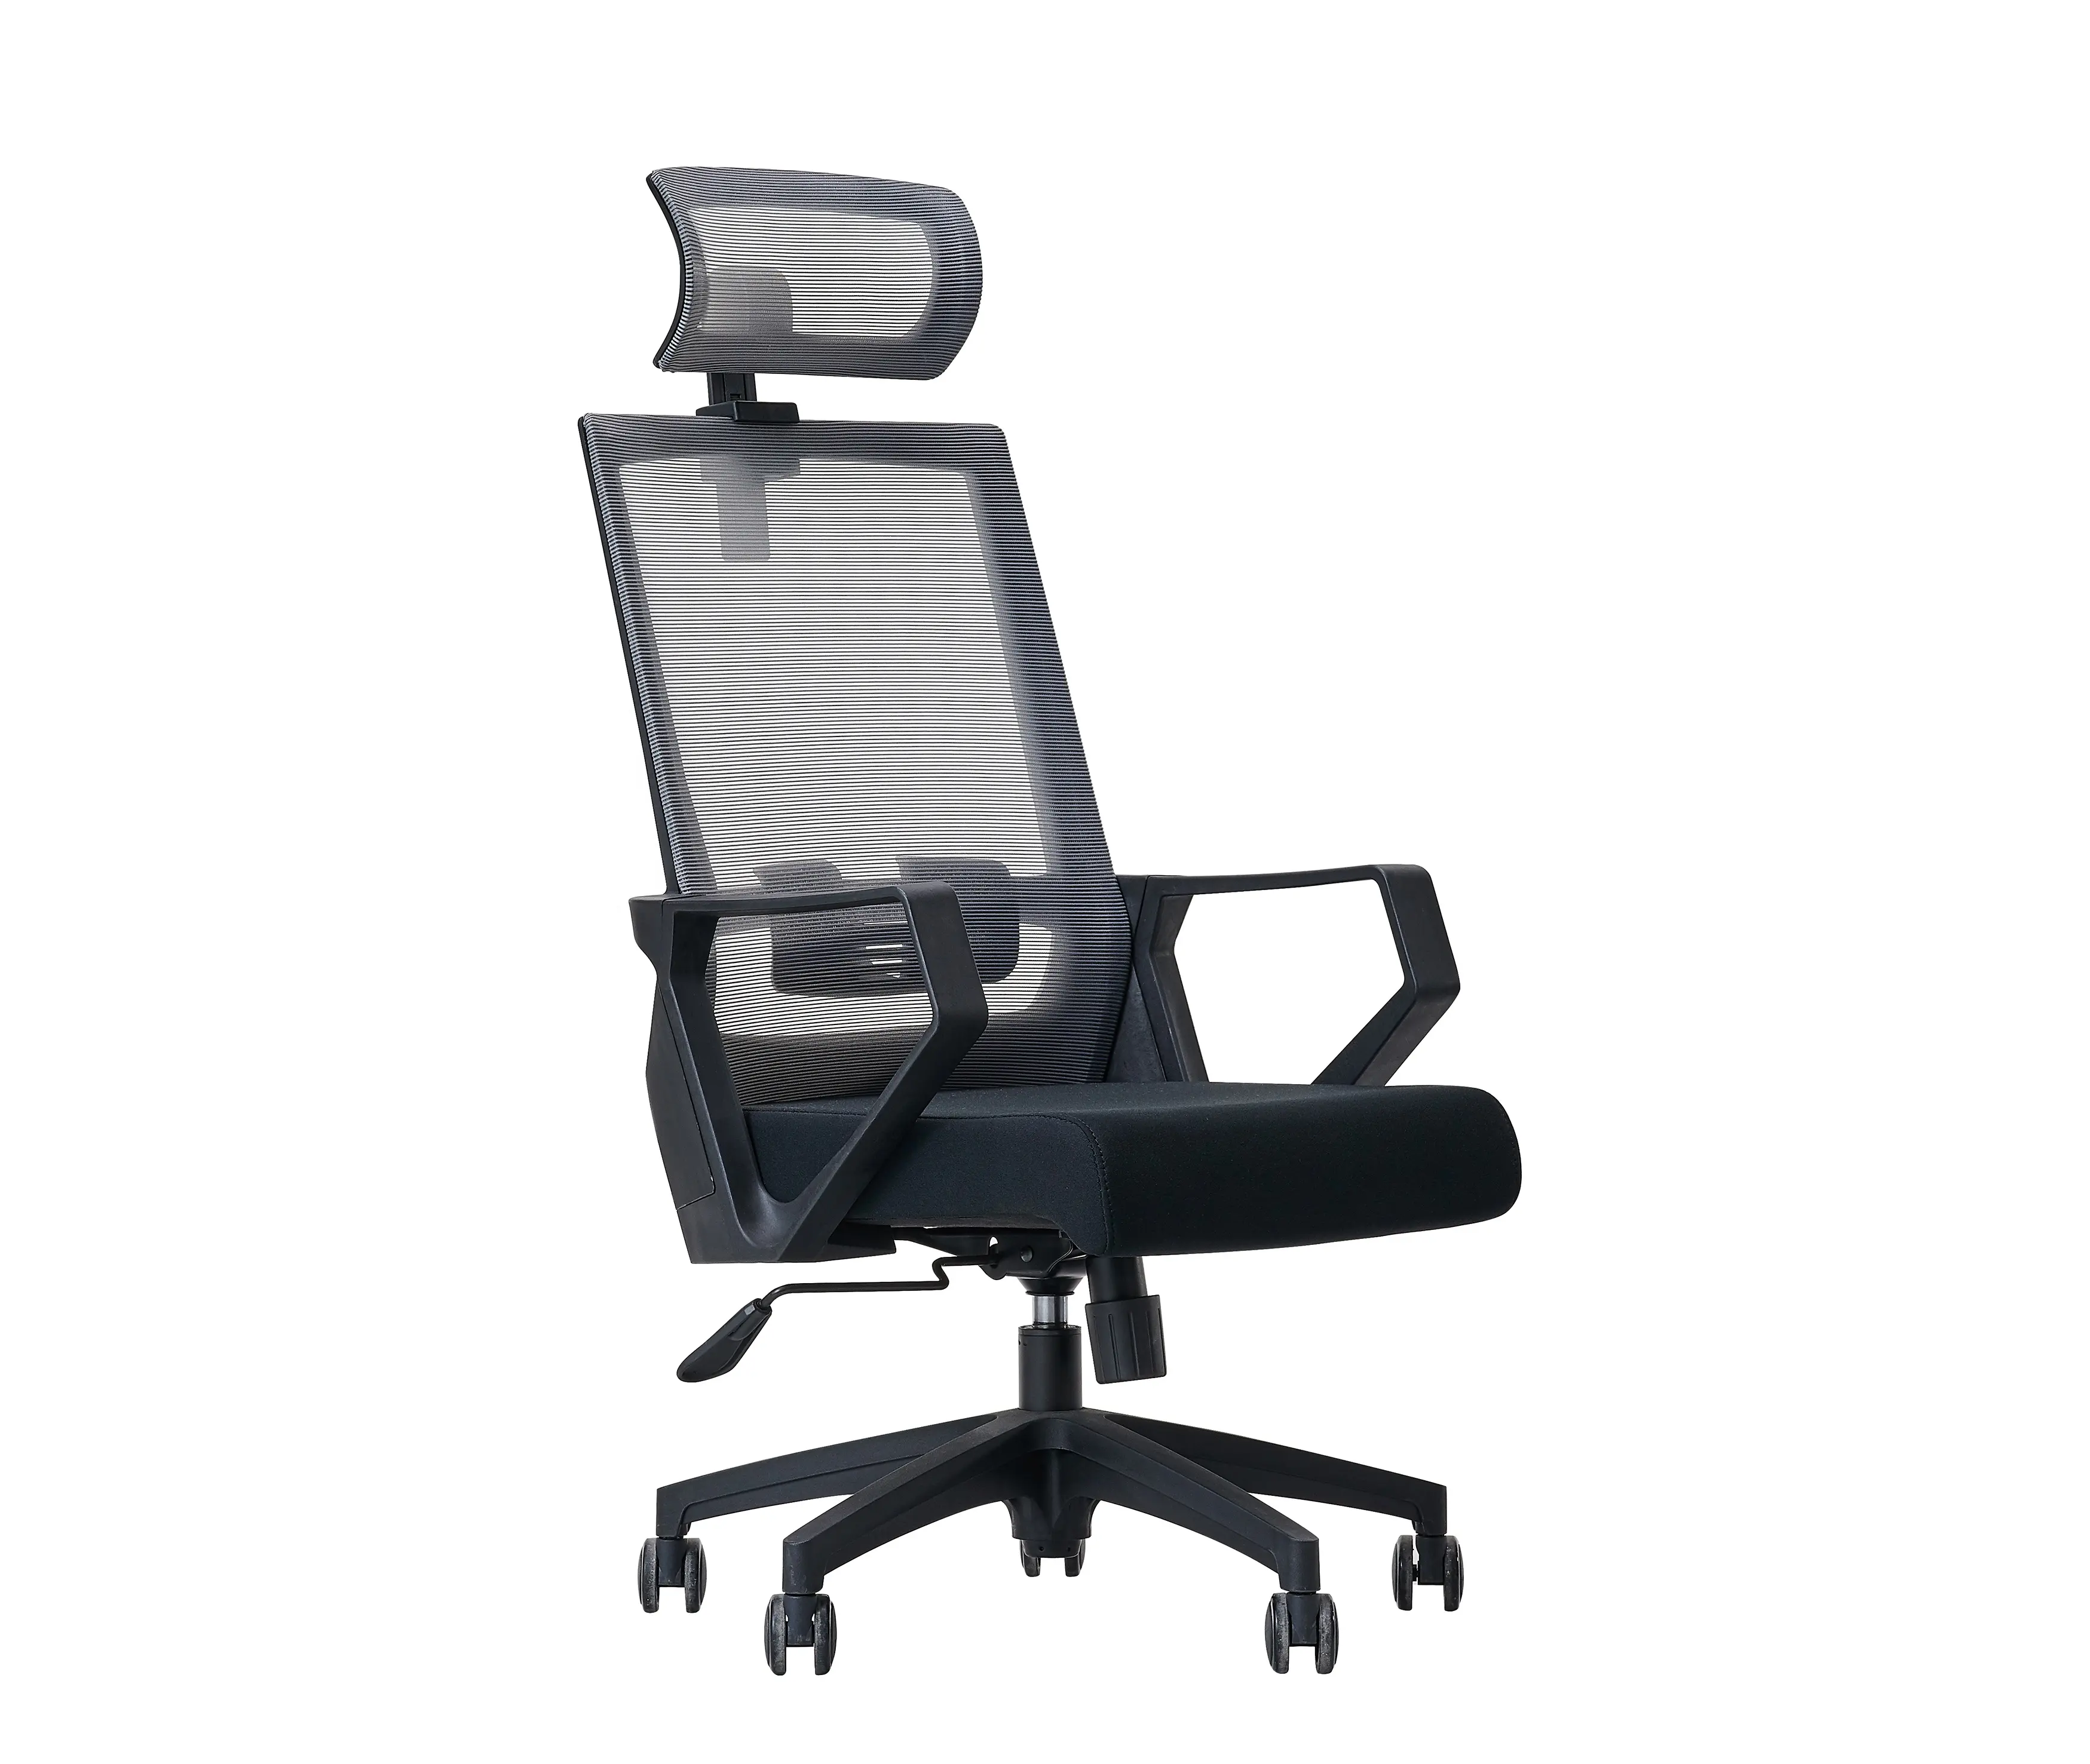 High quality adjustable office chair mesh with swivel wheel and headrest